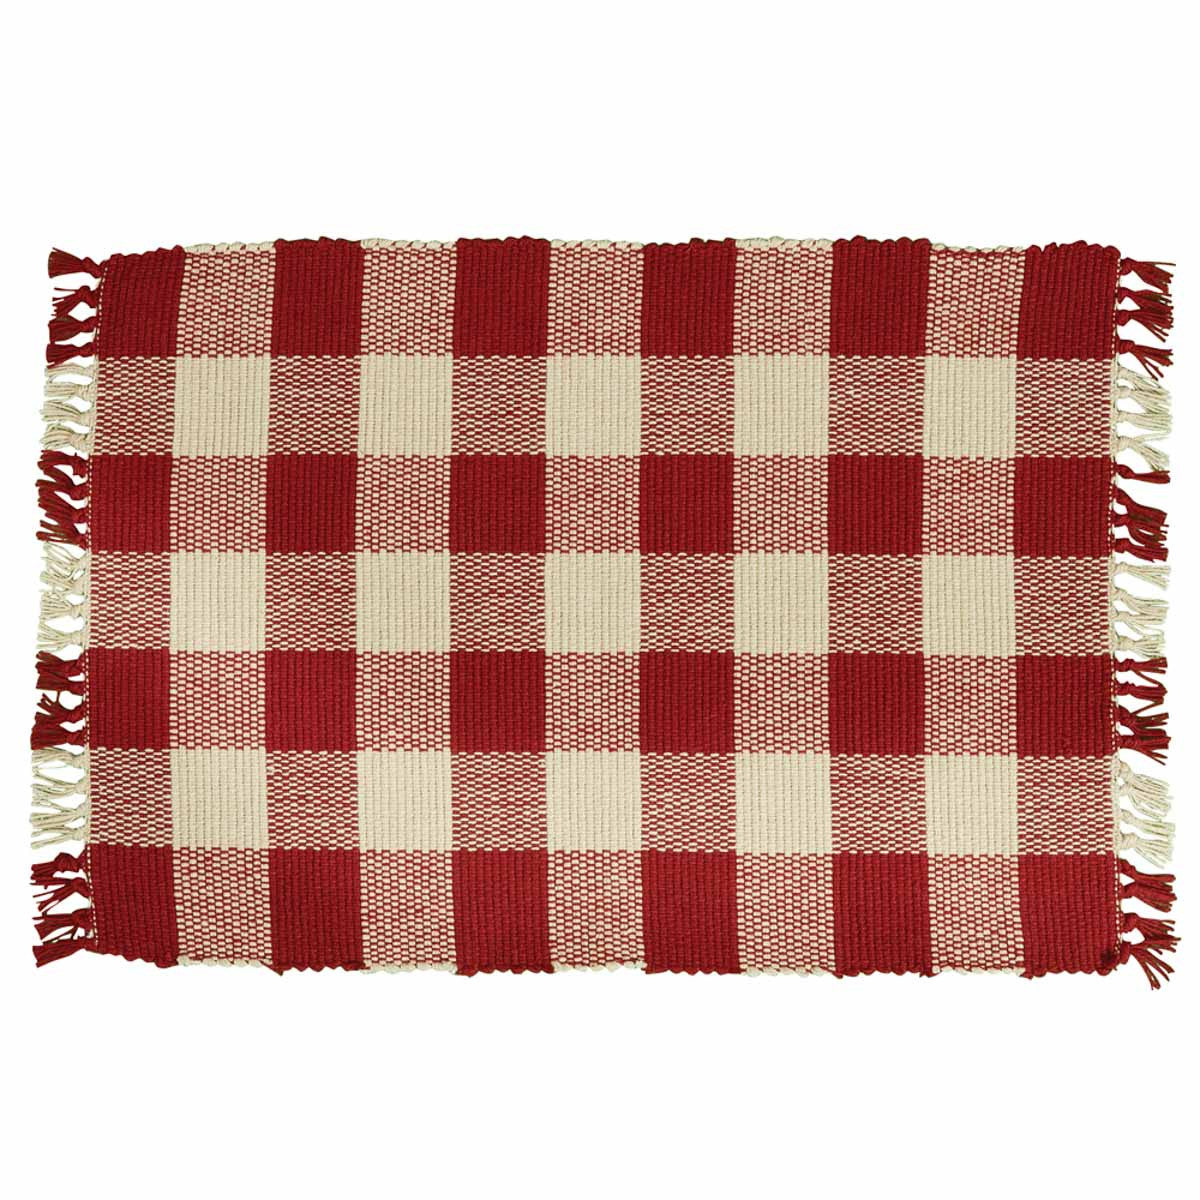 Wicklow Check Placemat Set-Red/Cream